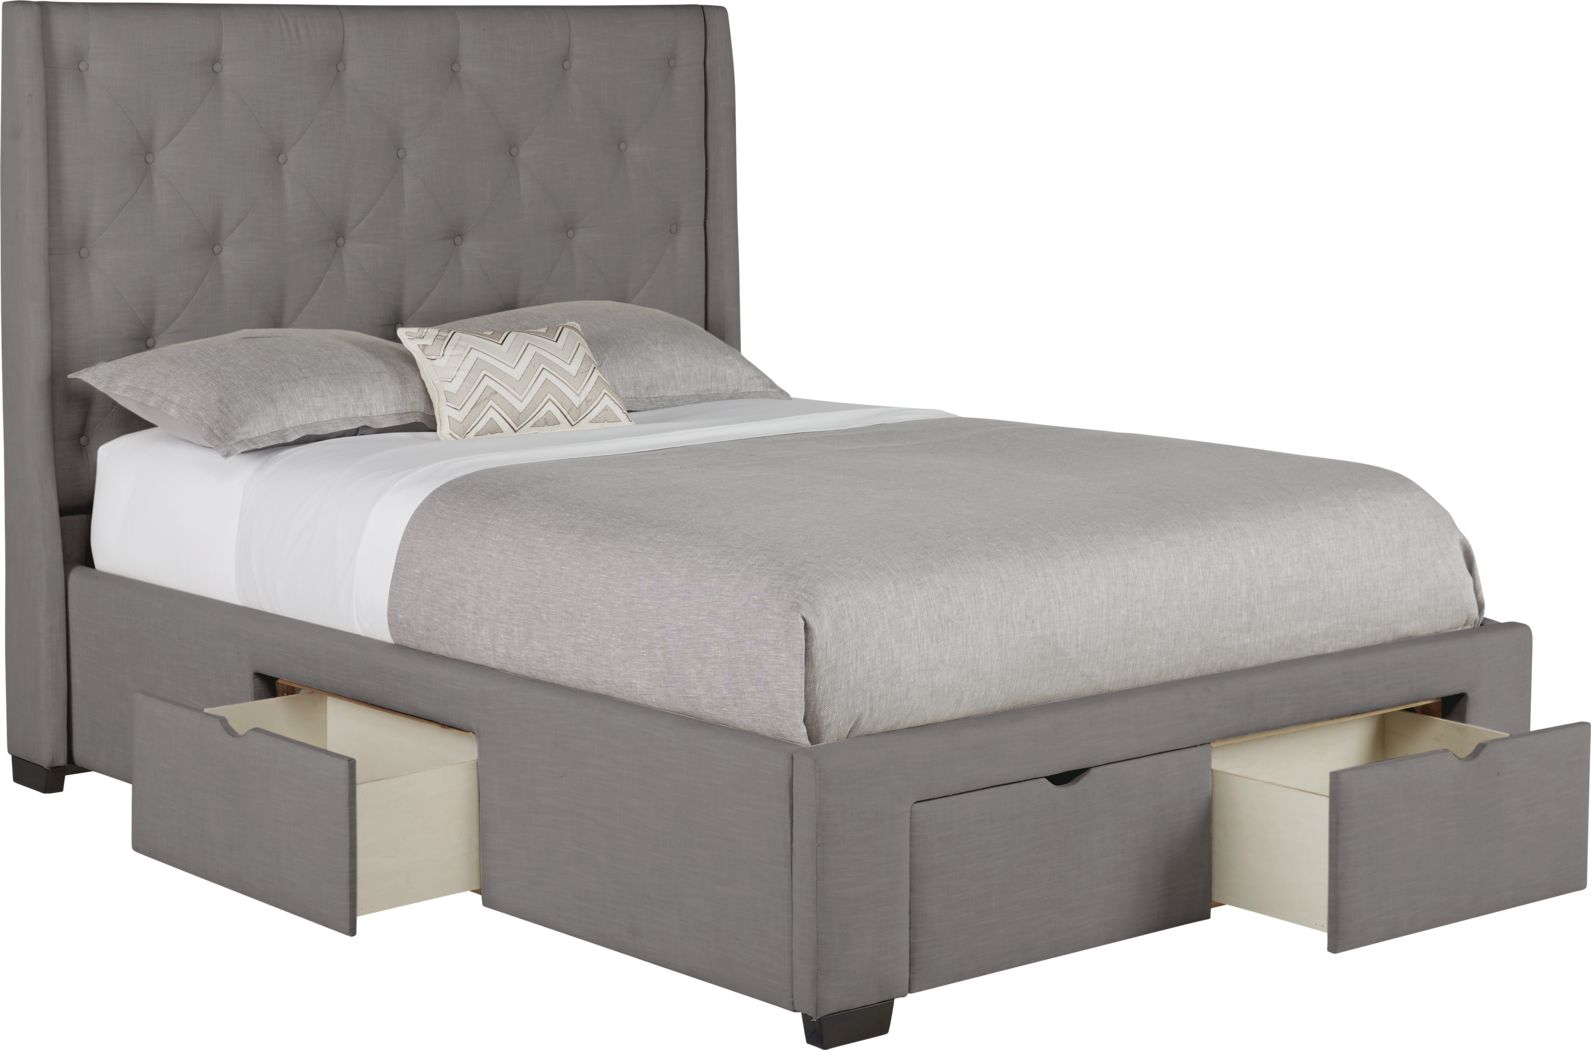 Storage King Size Beds Frames, King Size Fabric Bed Frame With Drawers